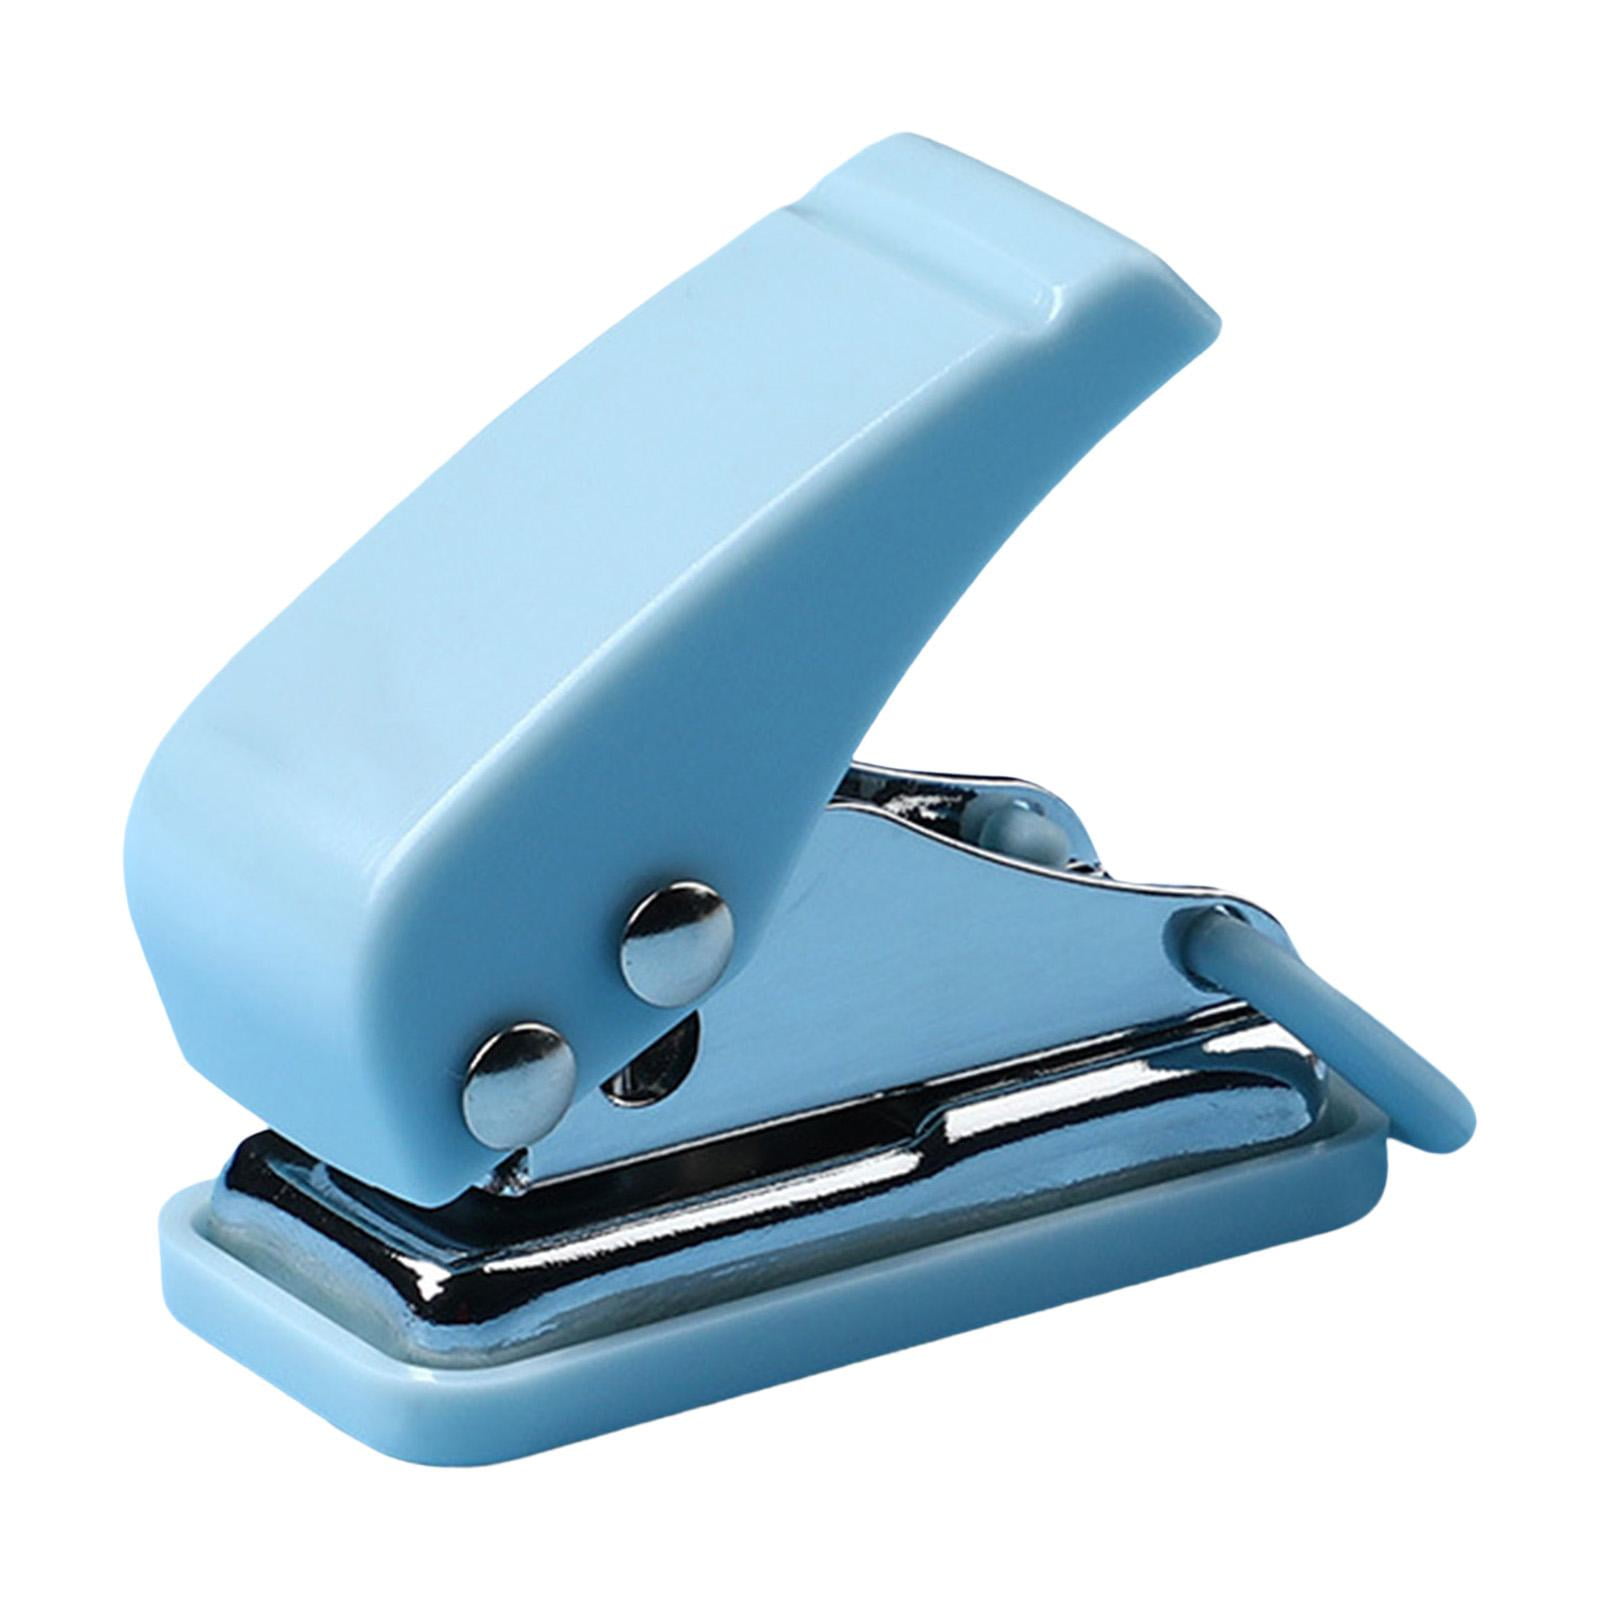 Mini Hole Punch, 10 Sheets Punch Capacity, Single Ring Cute Handheld Hole  Punch, Suitable For Paper, Scrapbook Paper, Crafts, Stationery, Gift  Bag(blu